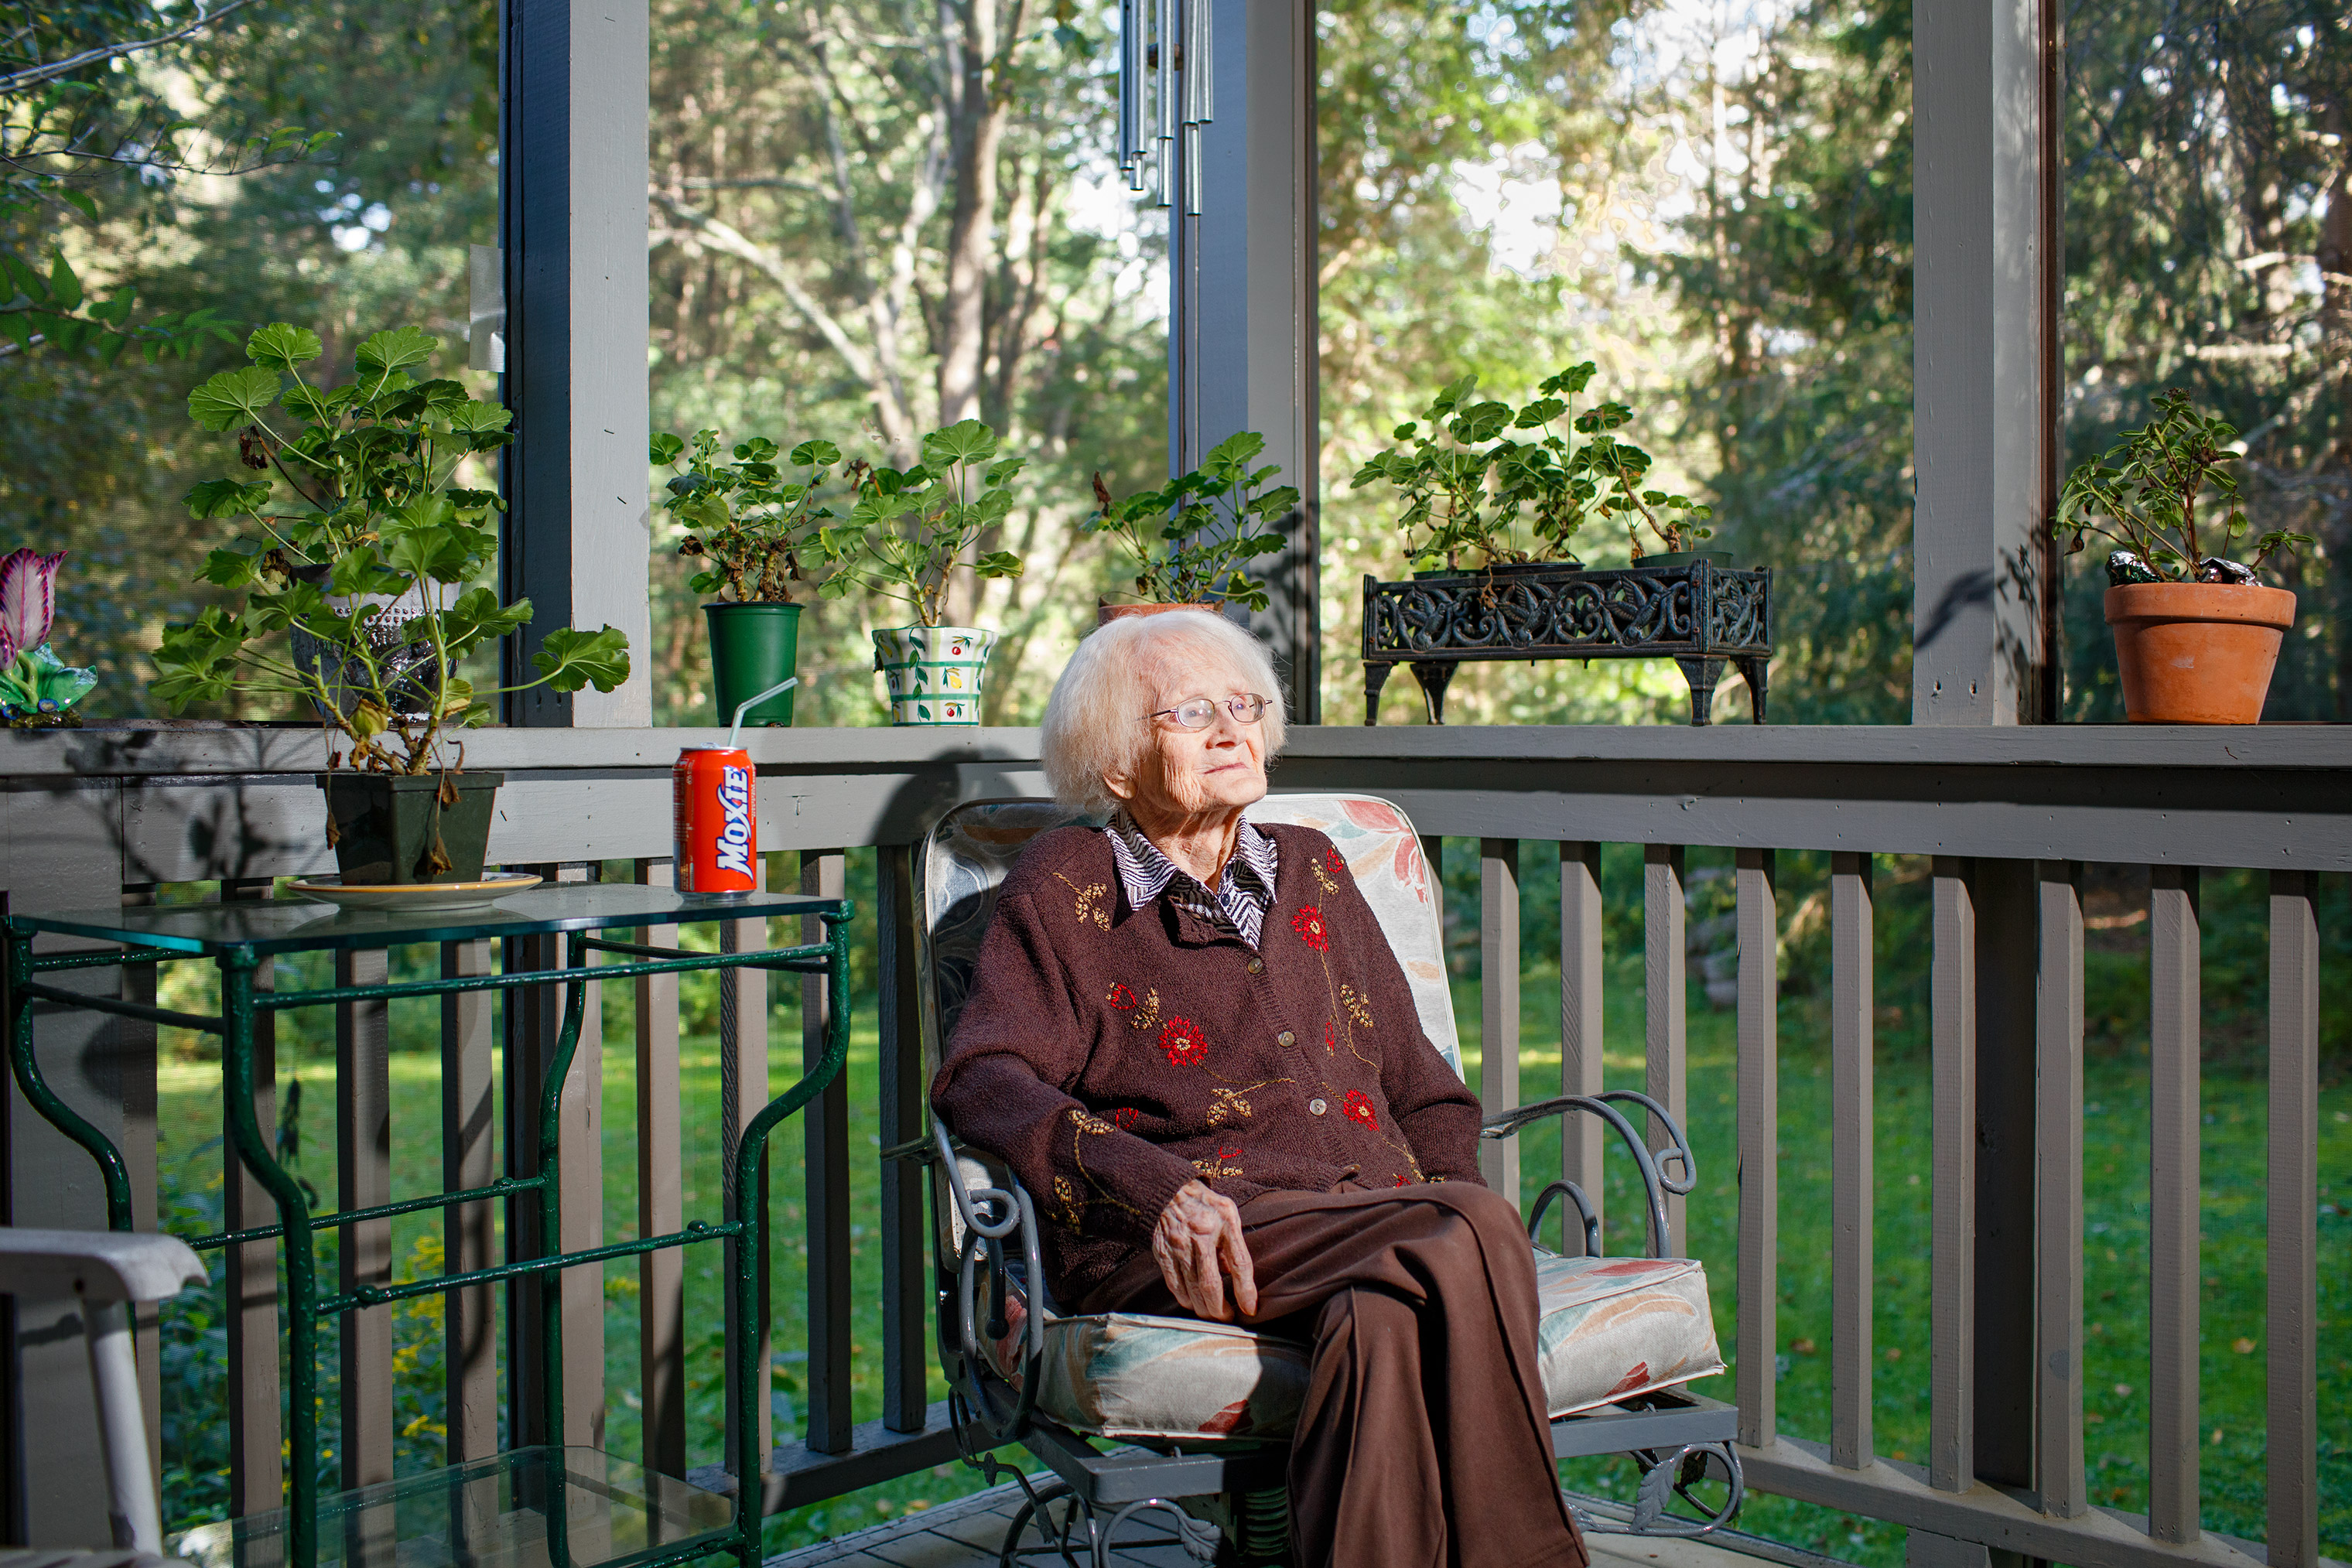 Patricia Lyons Harrington, age 105, on her porch at home in Essex, Mass.